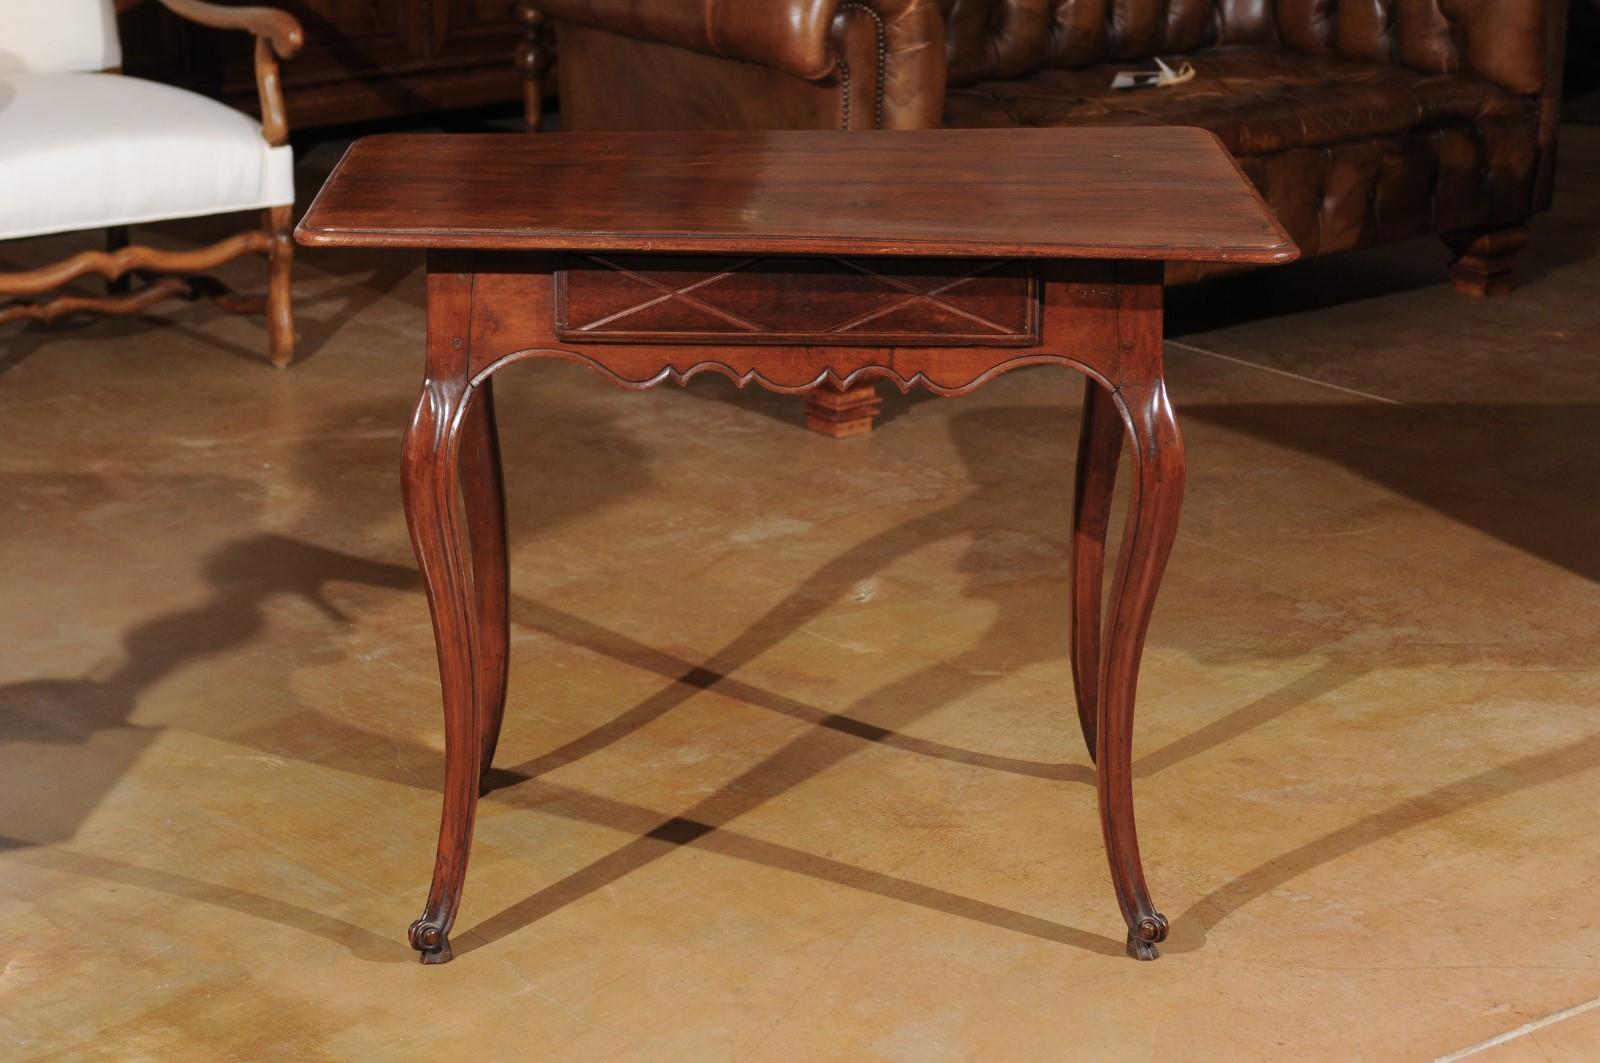 French Louis XV 1780s Solid Walnut Side Table with Drawer and Fretted Motifs (18. Jahrhundert)